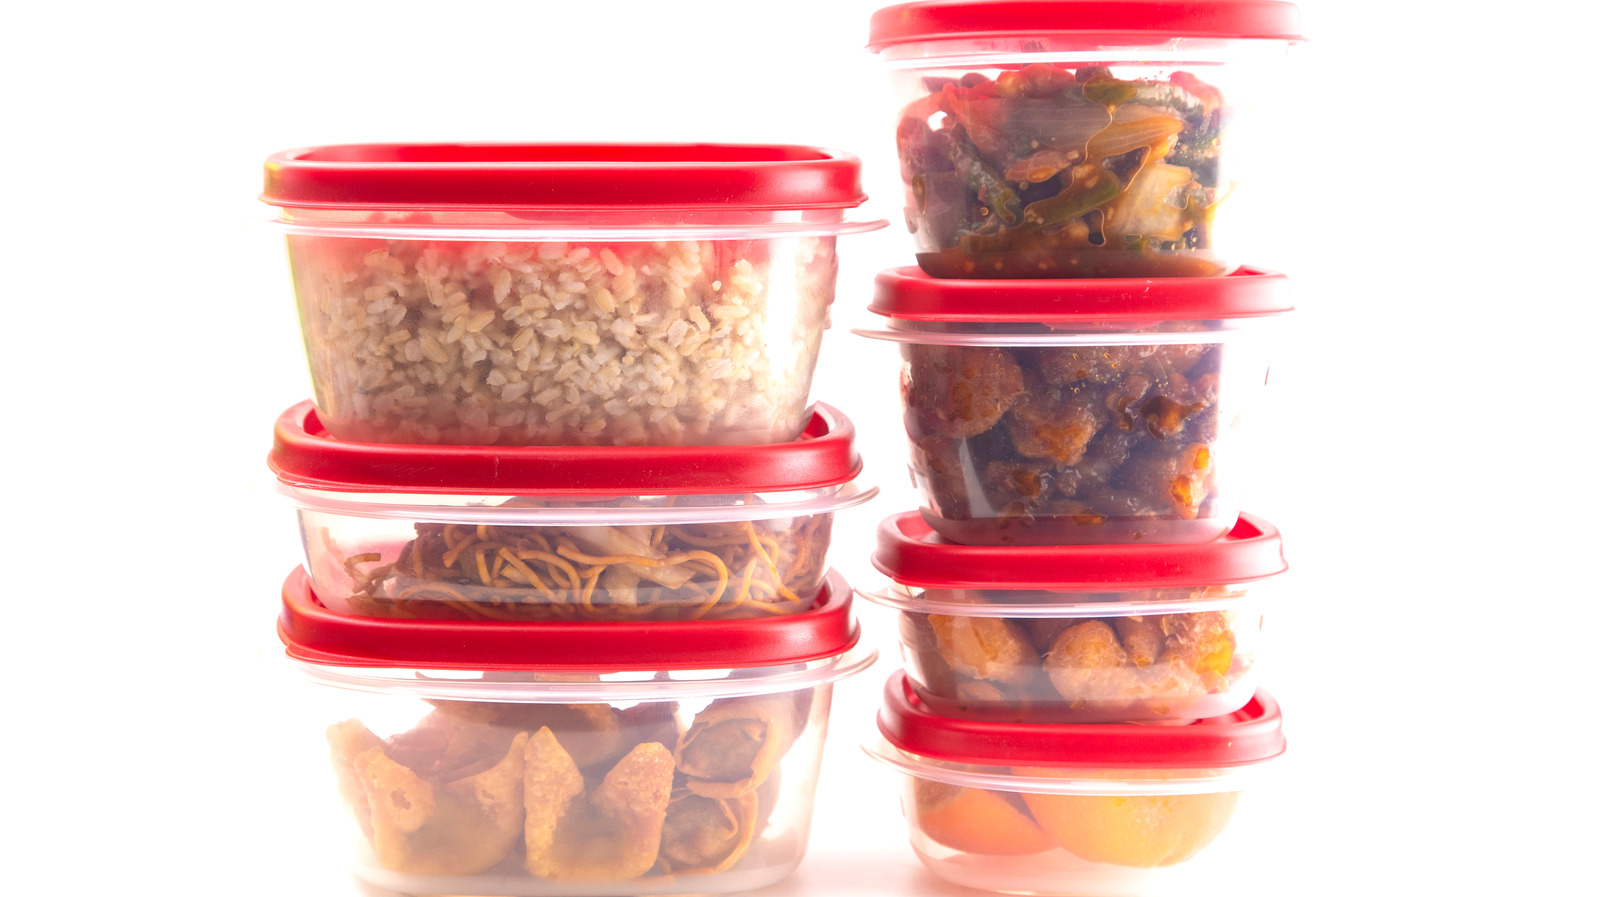 Types Of Containers You Should Never Use To Reheat Food In Your